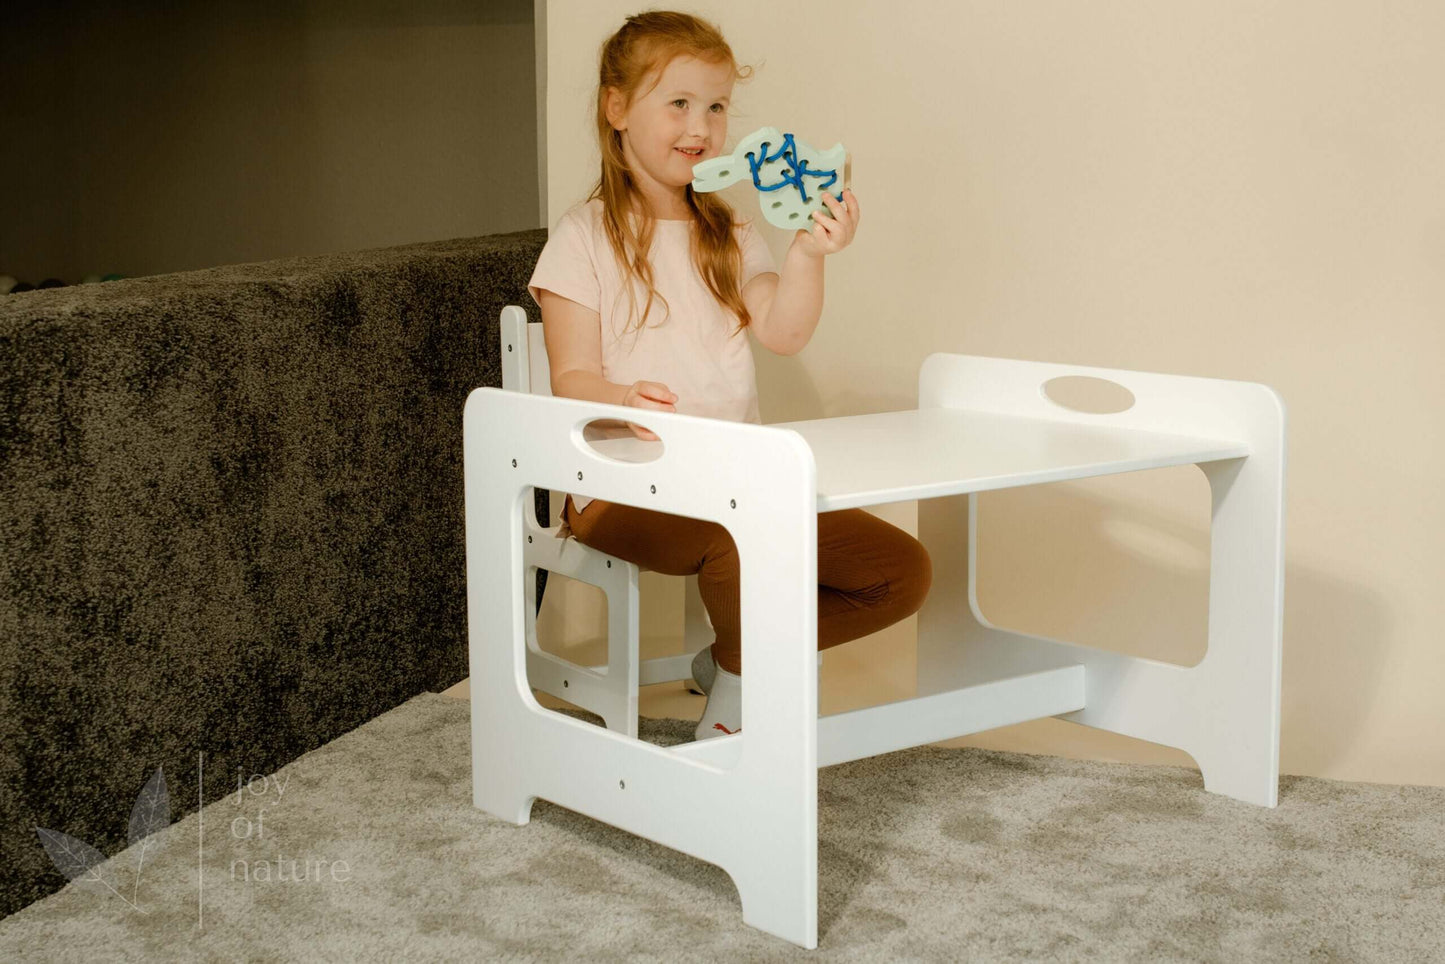 Children's table / game table with chairs